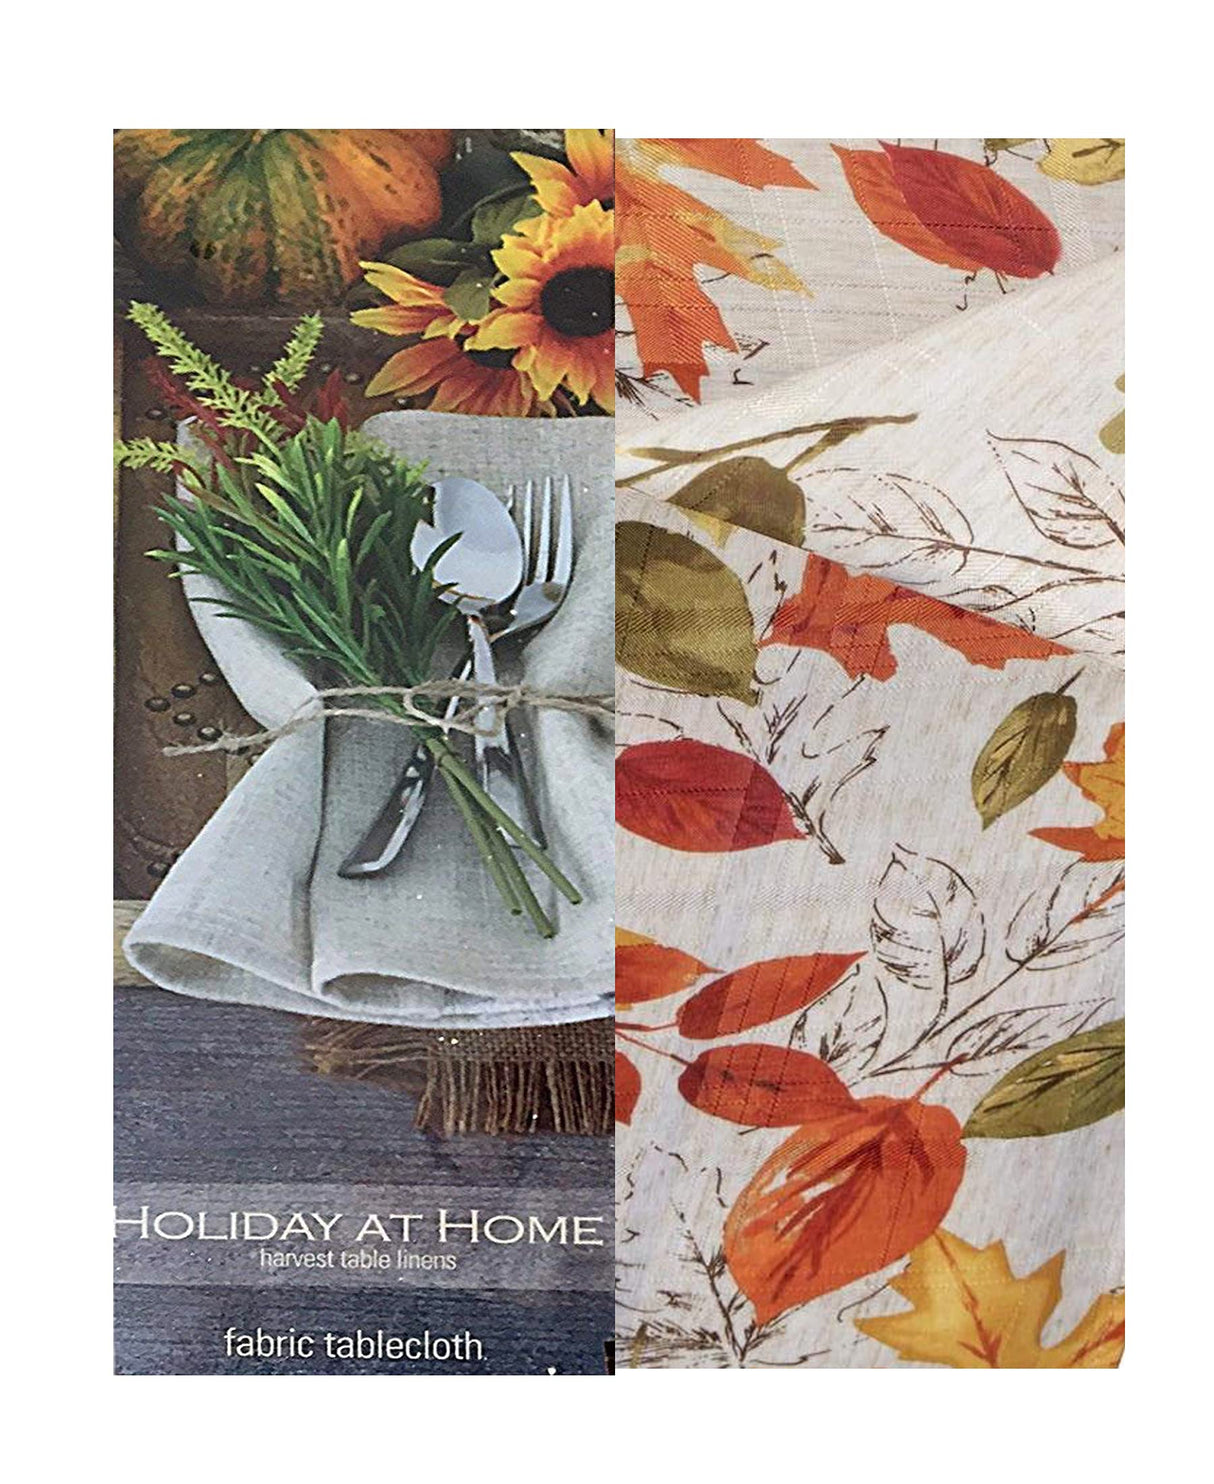 Newbridge Breezy Autumn Foliage Thanksgiving Fabric Tablecloth, Contemporary Bold Colorful Fall Leaves Soil Resistant Easy Care Tablecloth, 52” x 70” Oblong/Rectangle